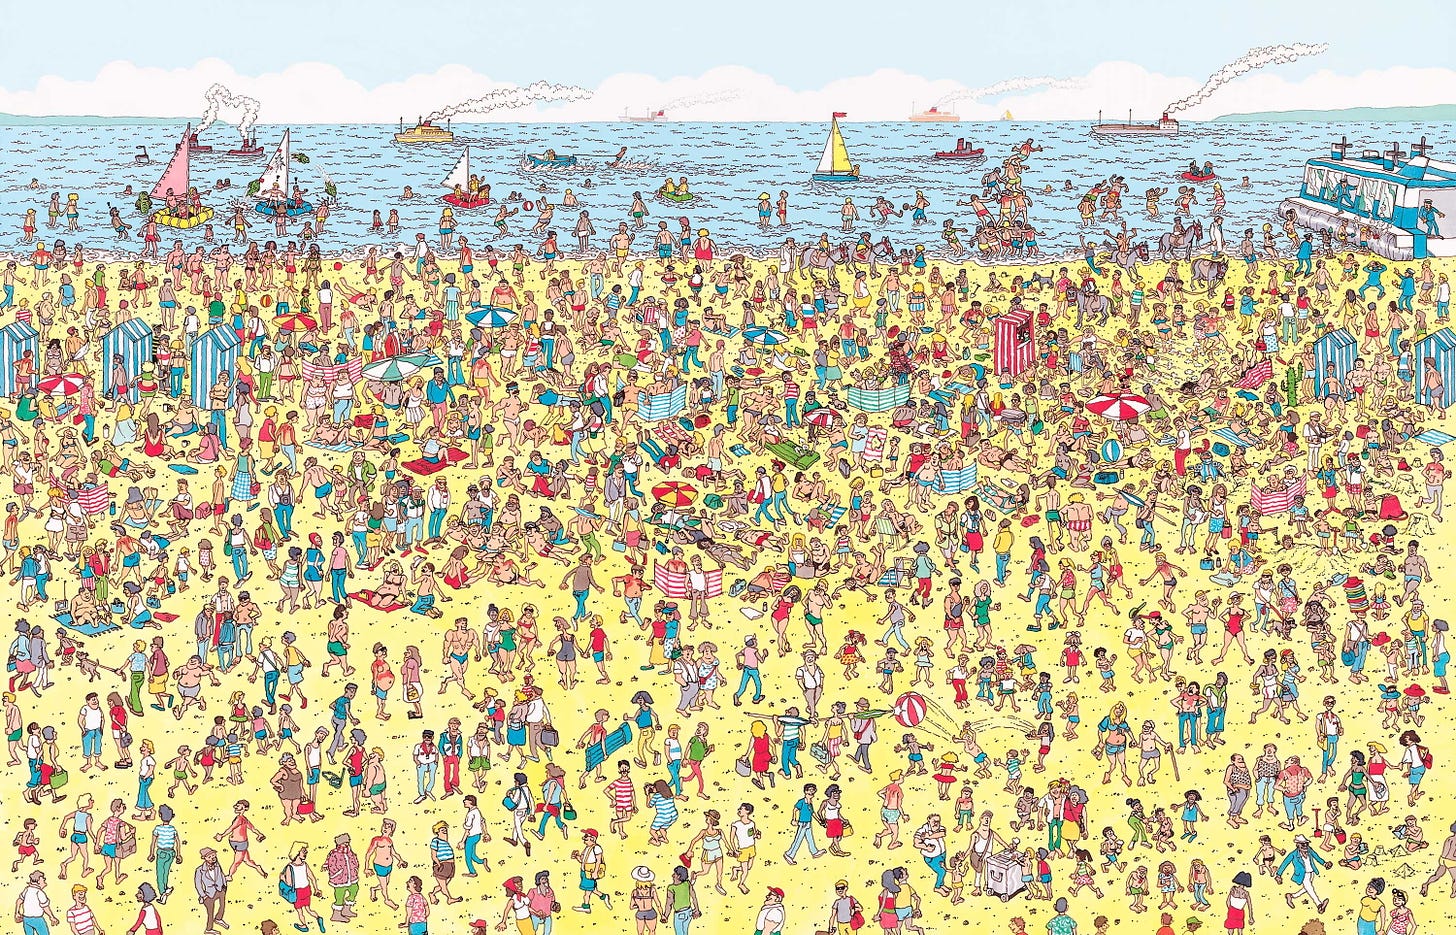 High-definition image of Where's Waldo on the beach